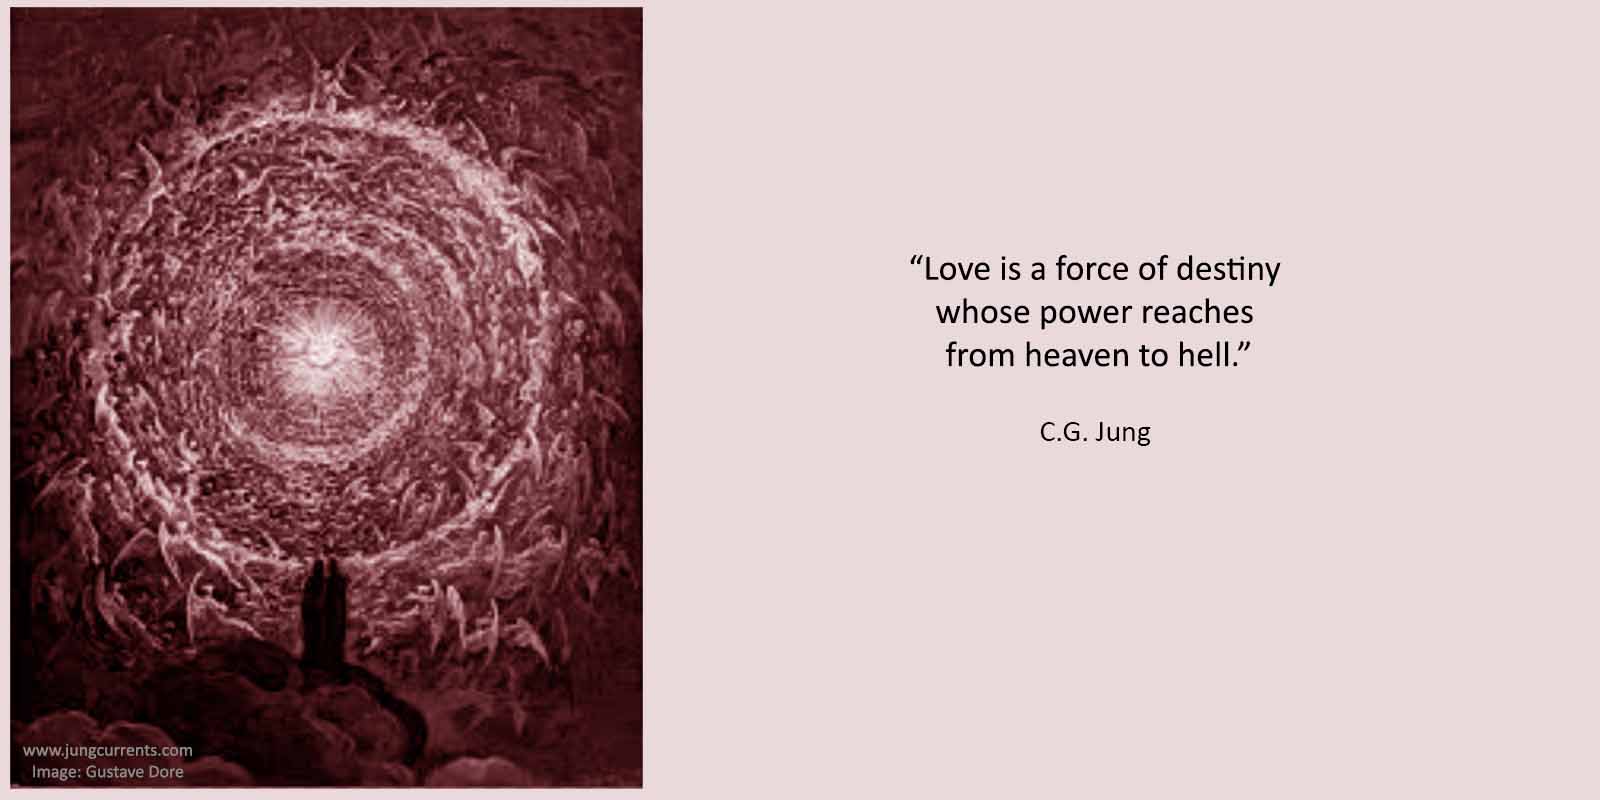 Love and destiny-Jung